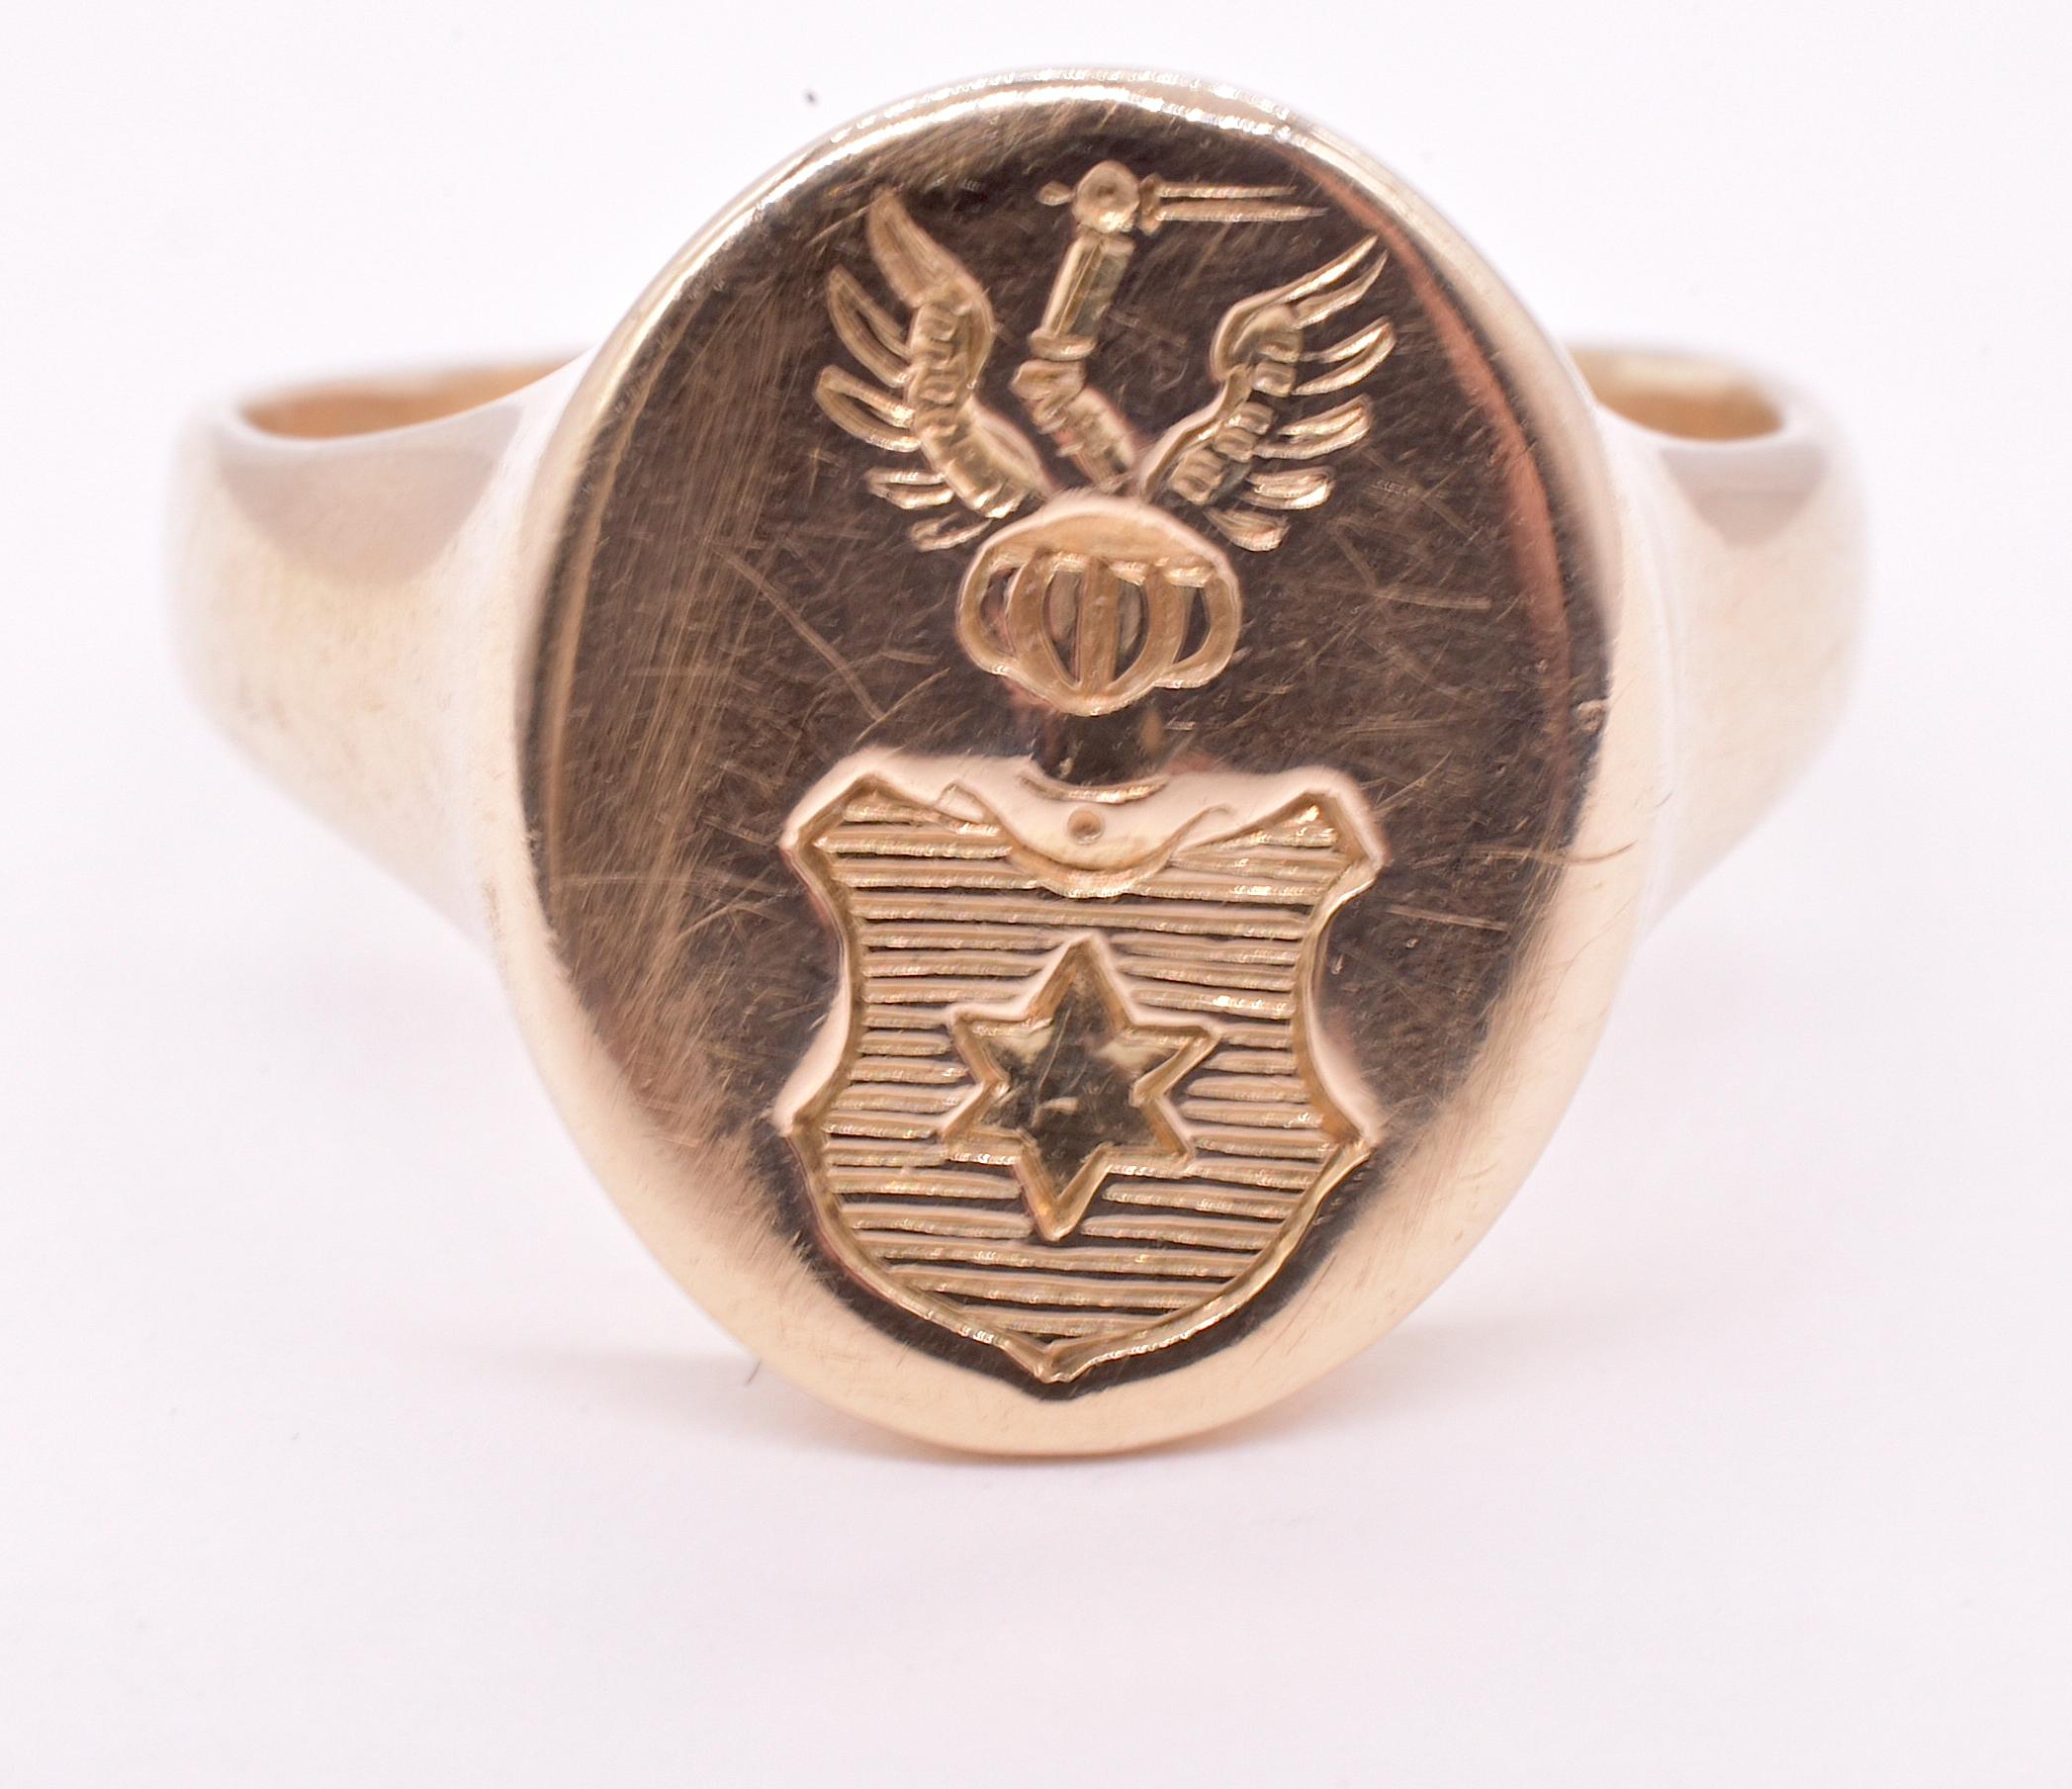 Our 14K signet ring is a stylized representation of a royal coat of arms, depicting a forward facing Royal open visor of gold on an open full faced knight or baron with heraldic details.  The star at the shield's center is a symbol of hope, the